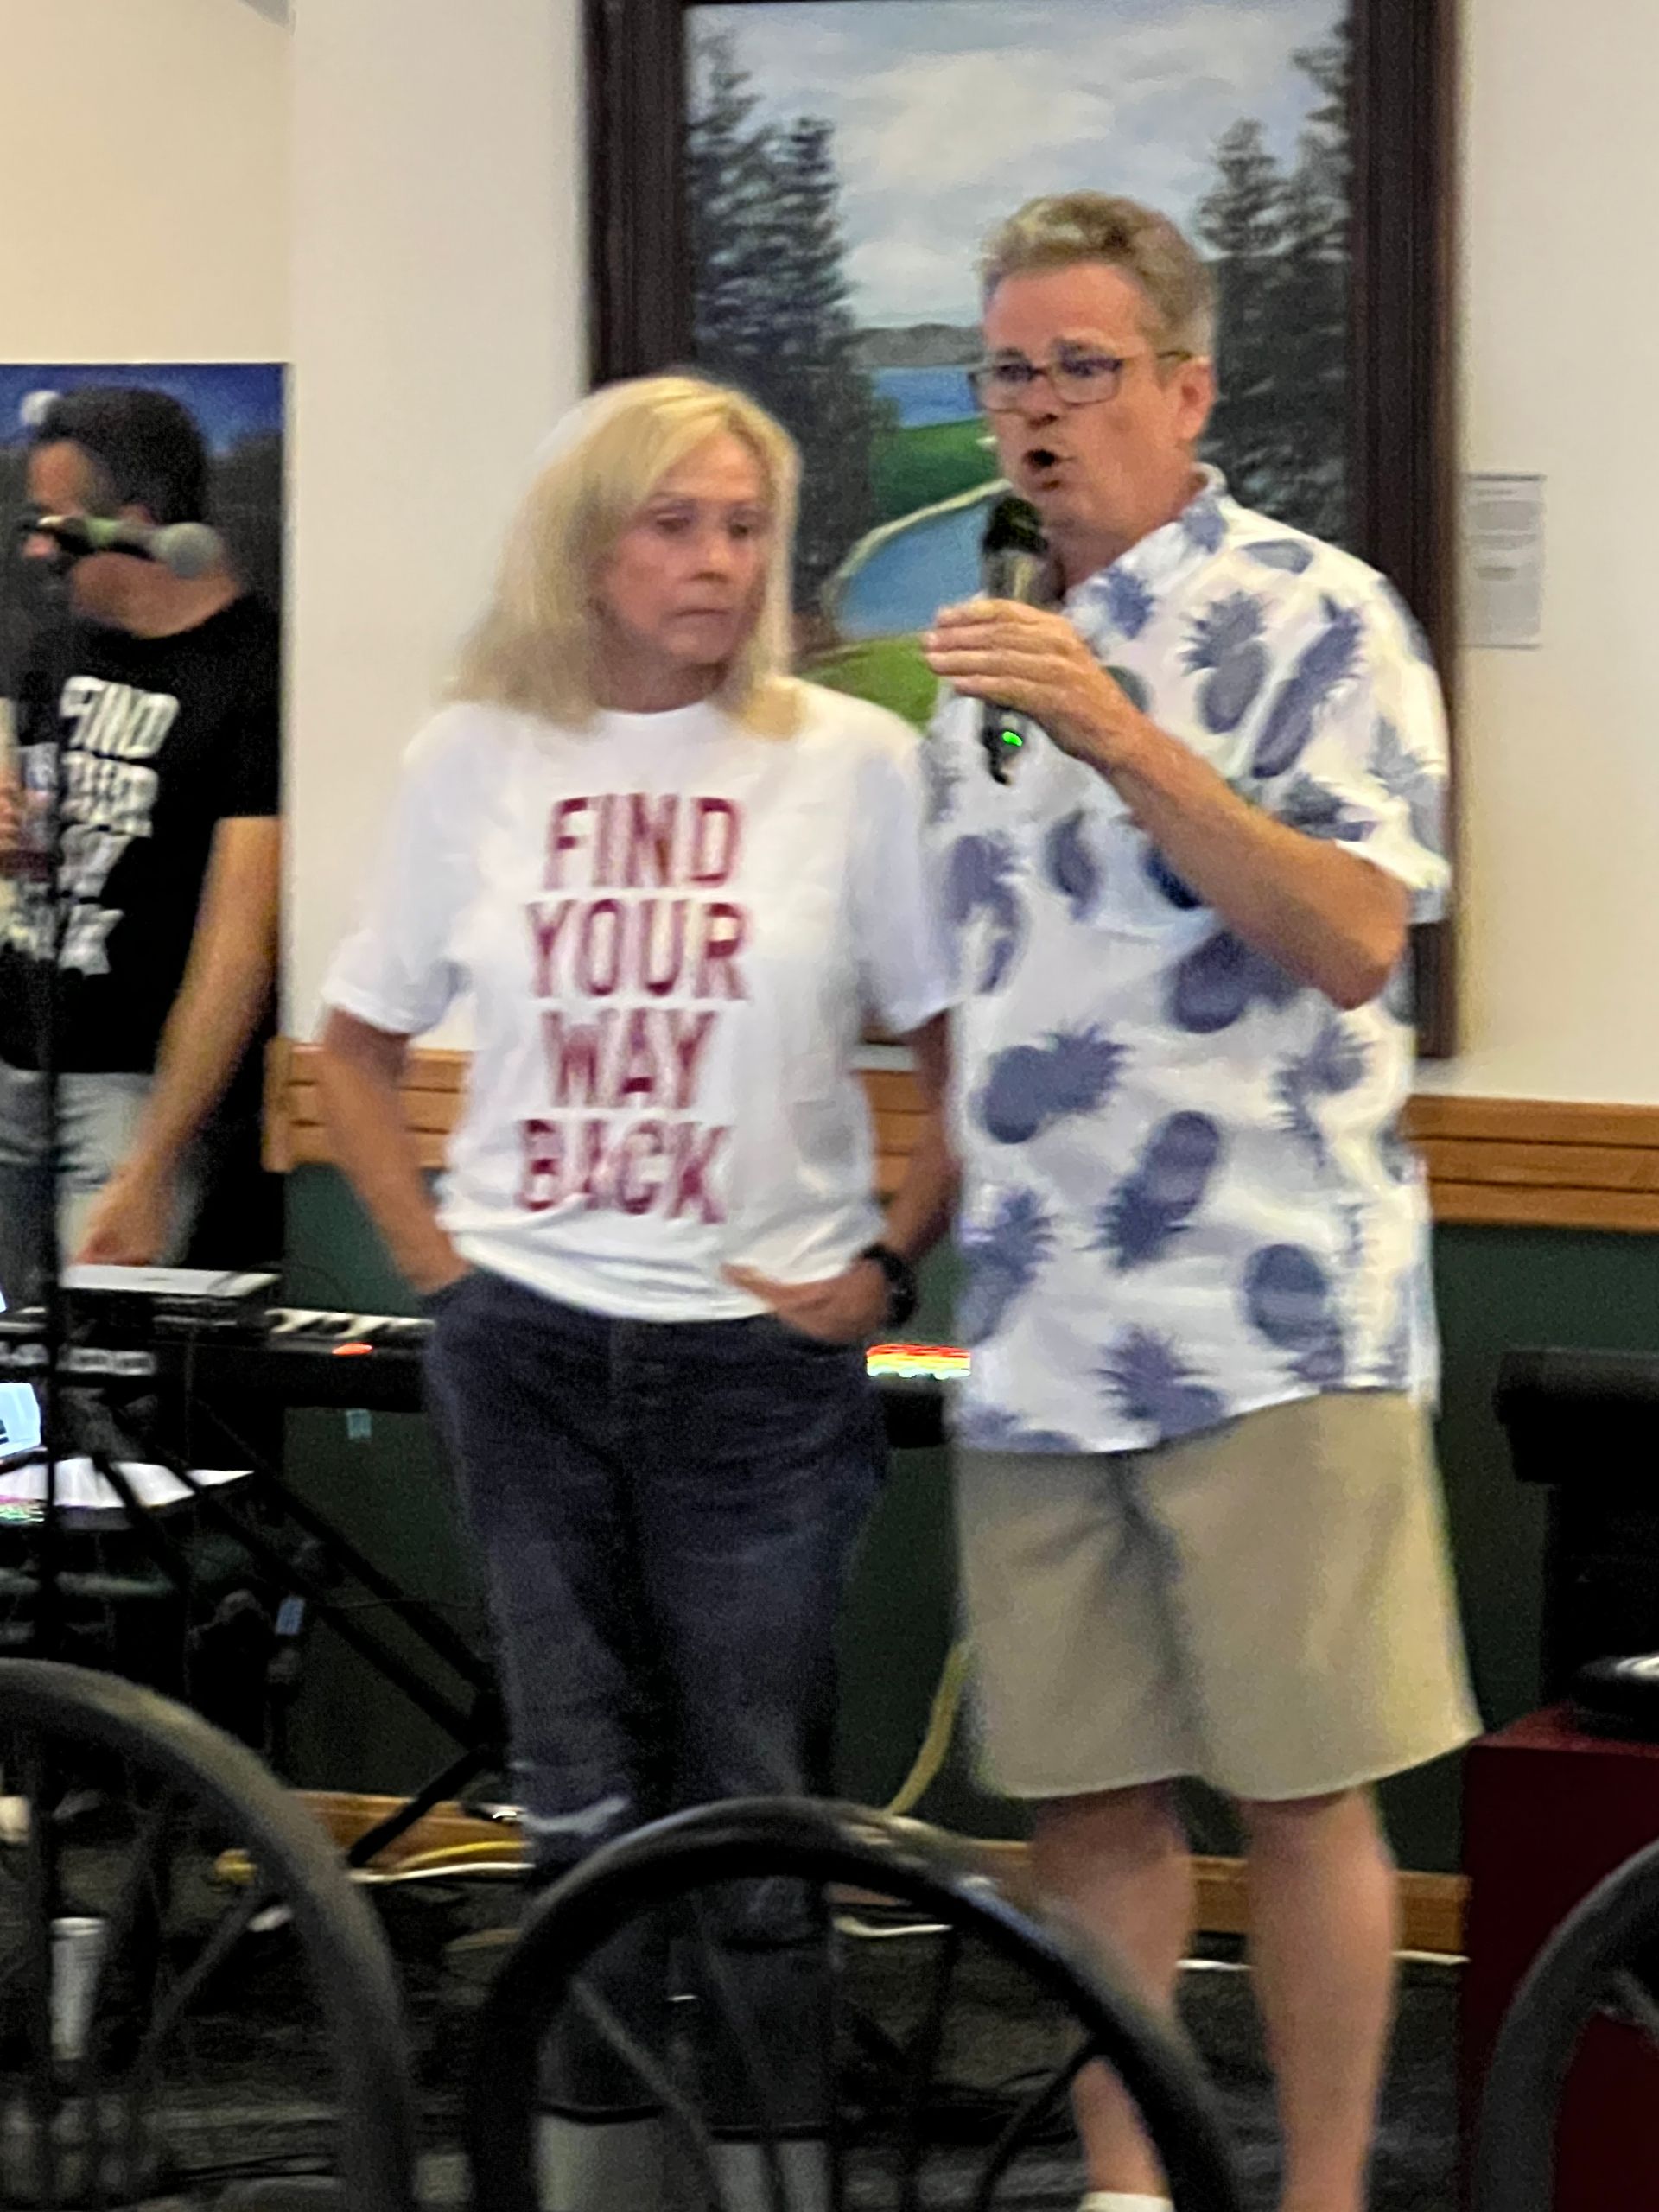 A man speaking into a microphone next to a woman wearing a shirt that says find your way back